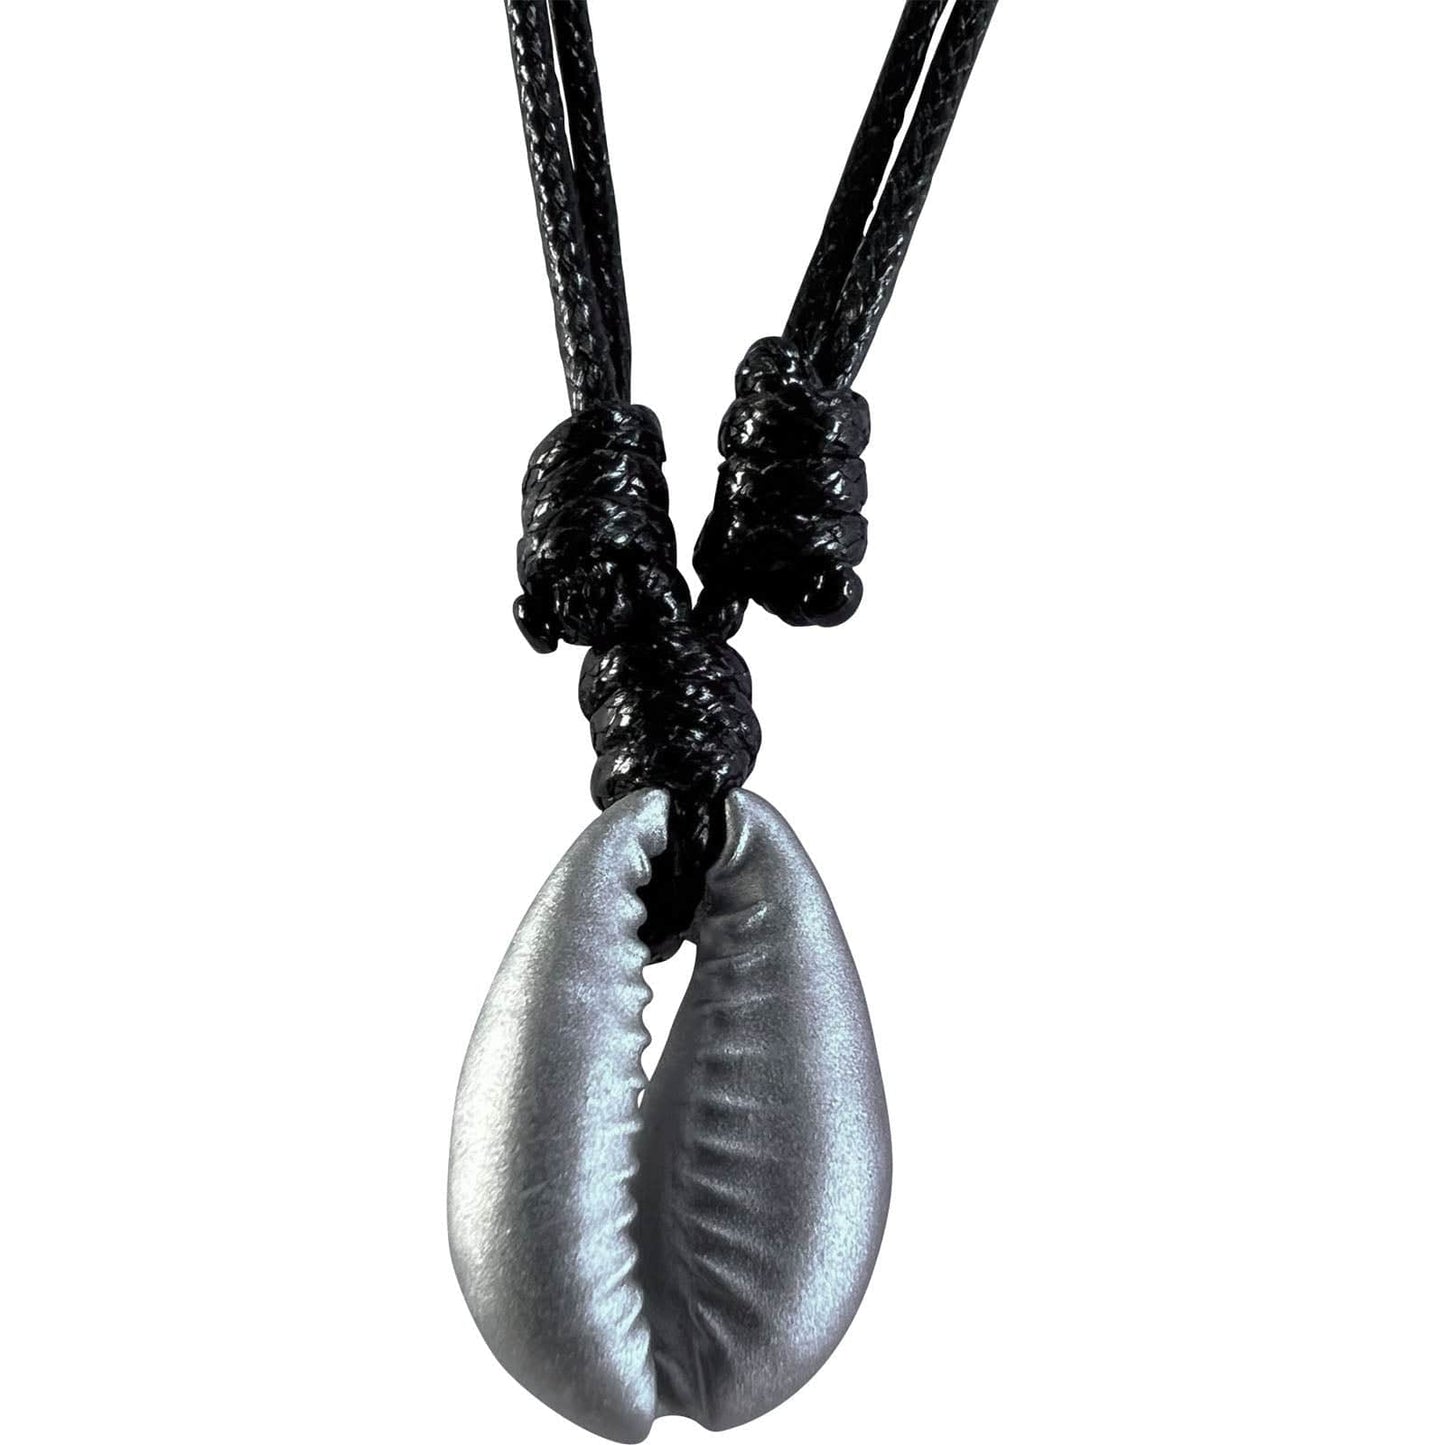 Silver Colour Shell Pendant Necklace Black Cord Chain Man Woman Boy Girl Jewelry